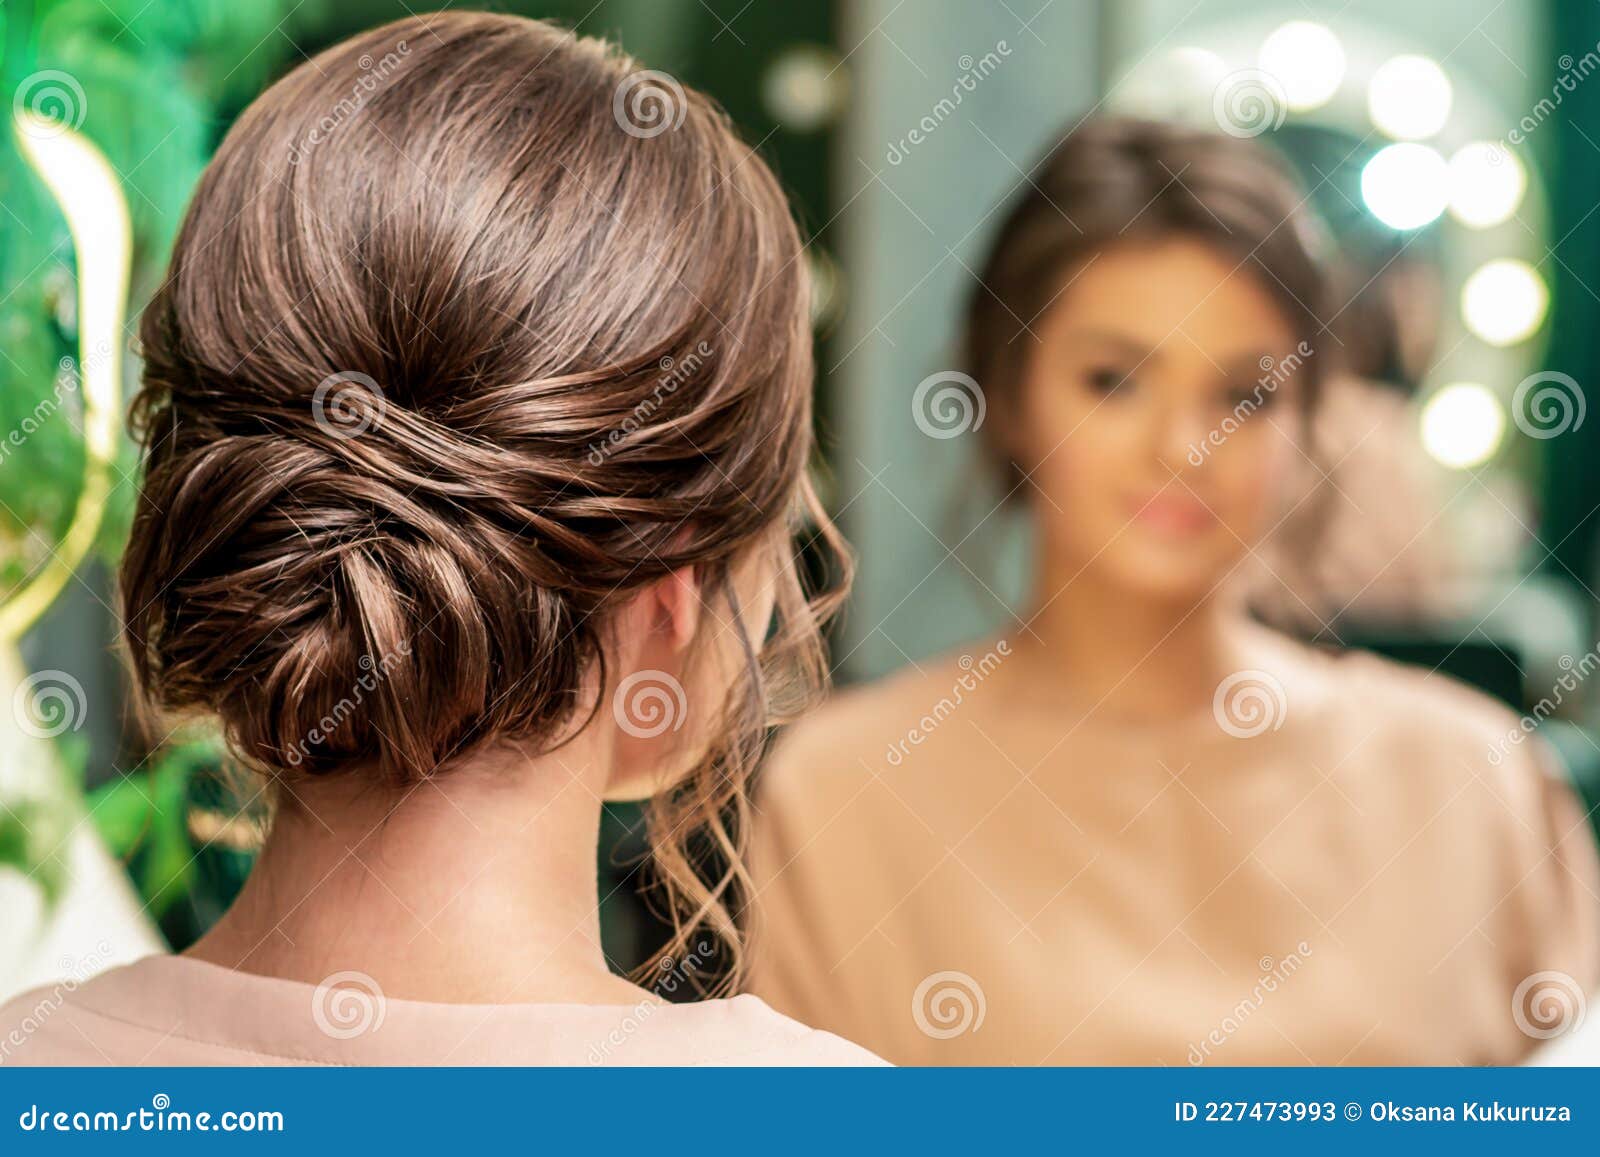 Woman with hairstyle. stock image. Image of beautiful - 227473993